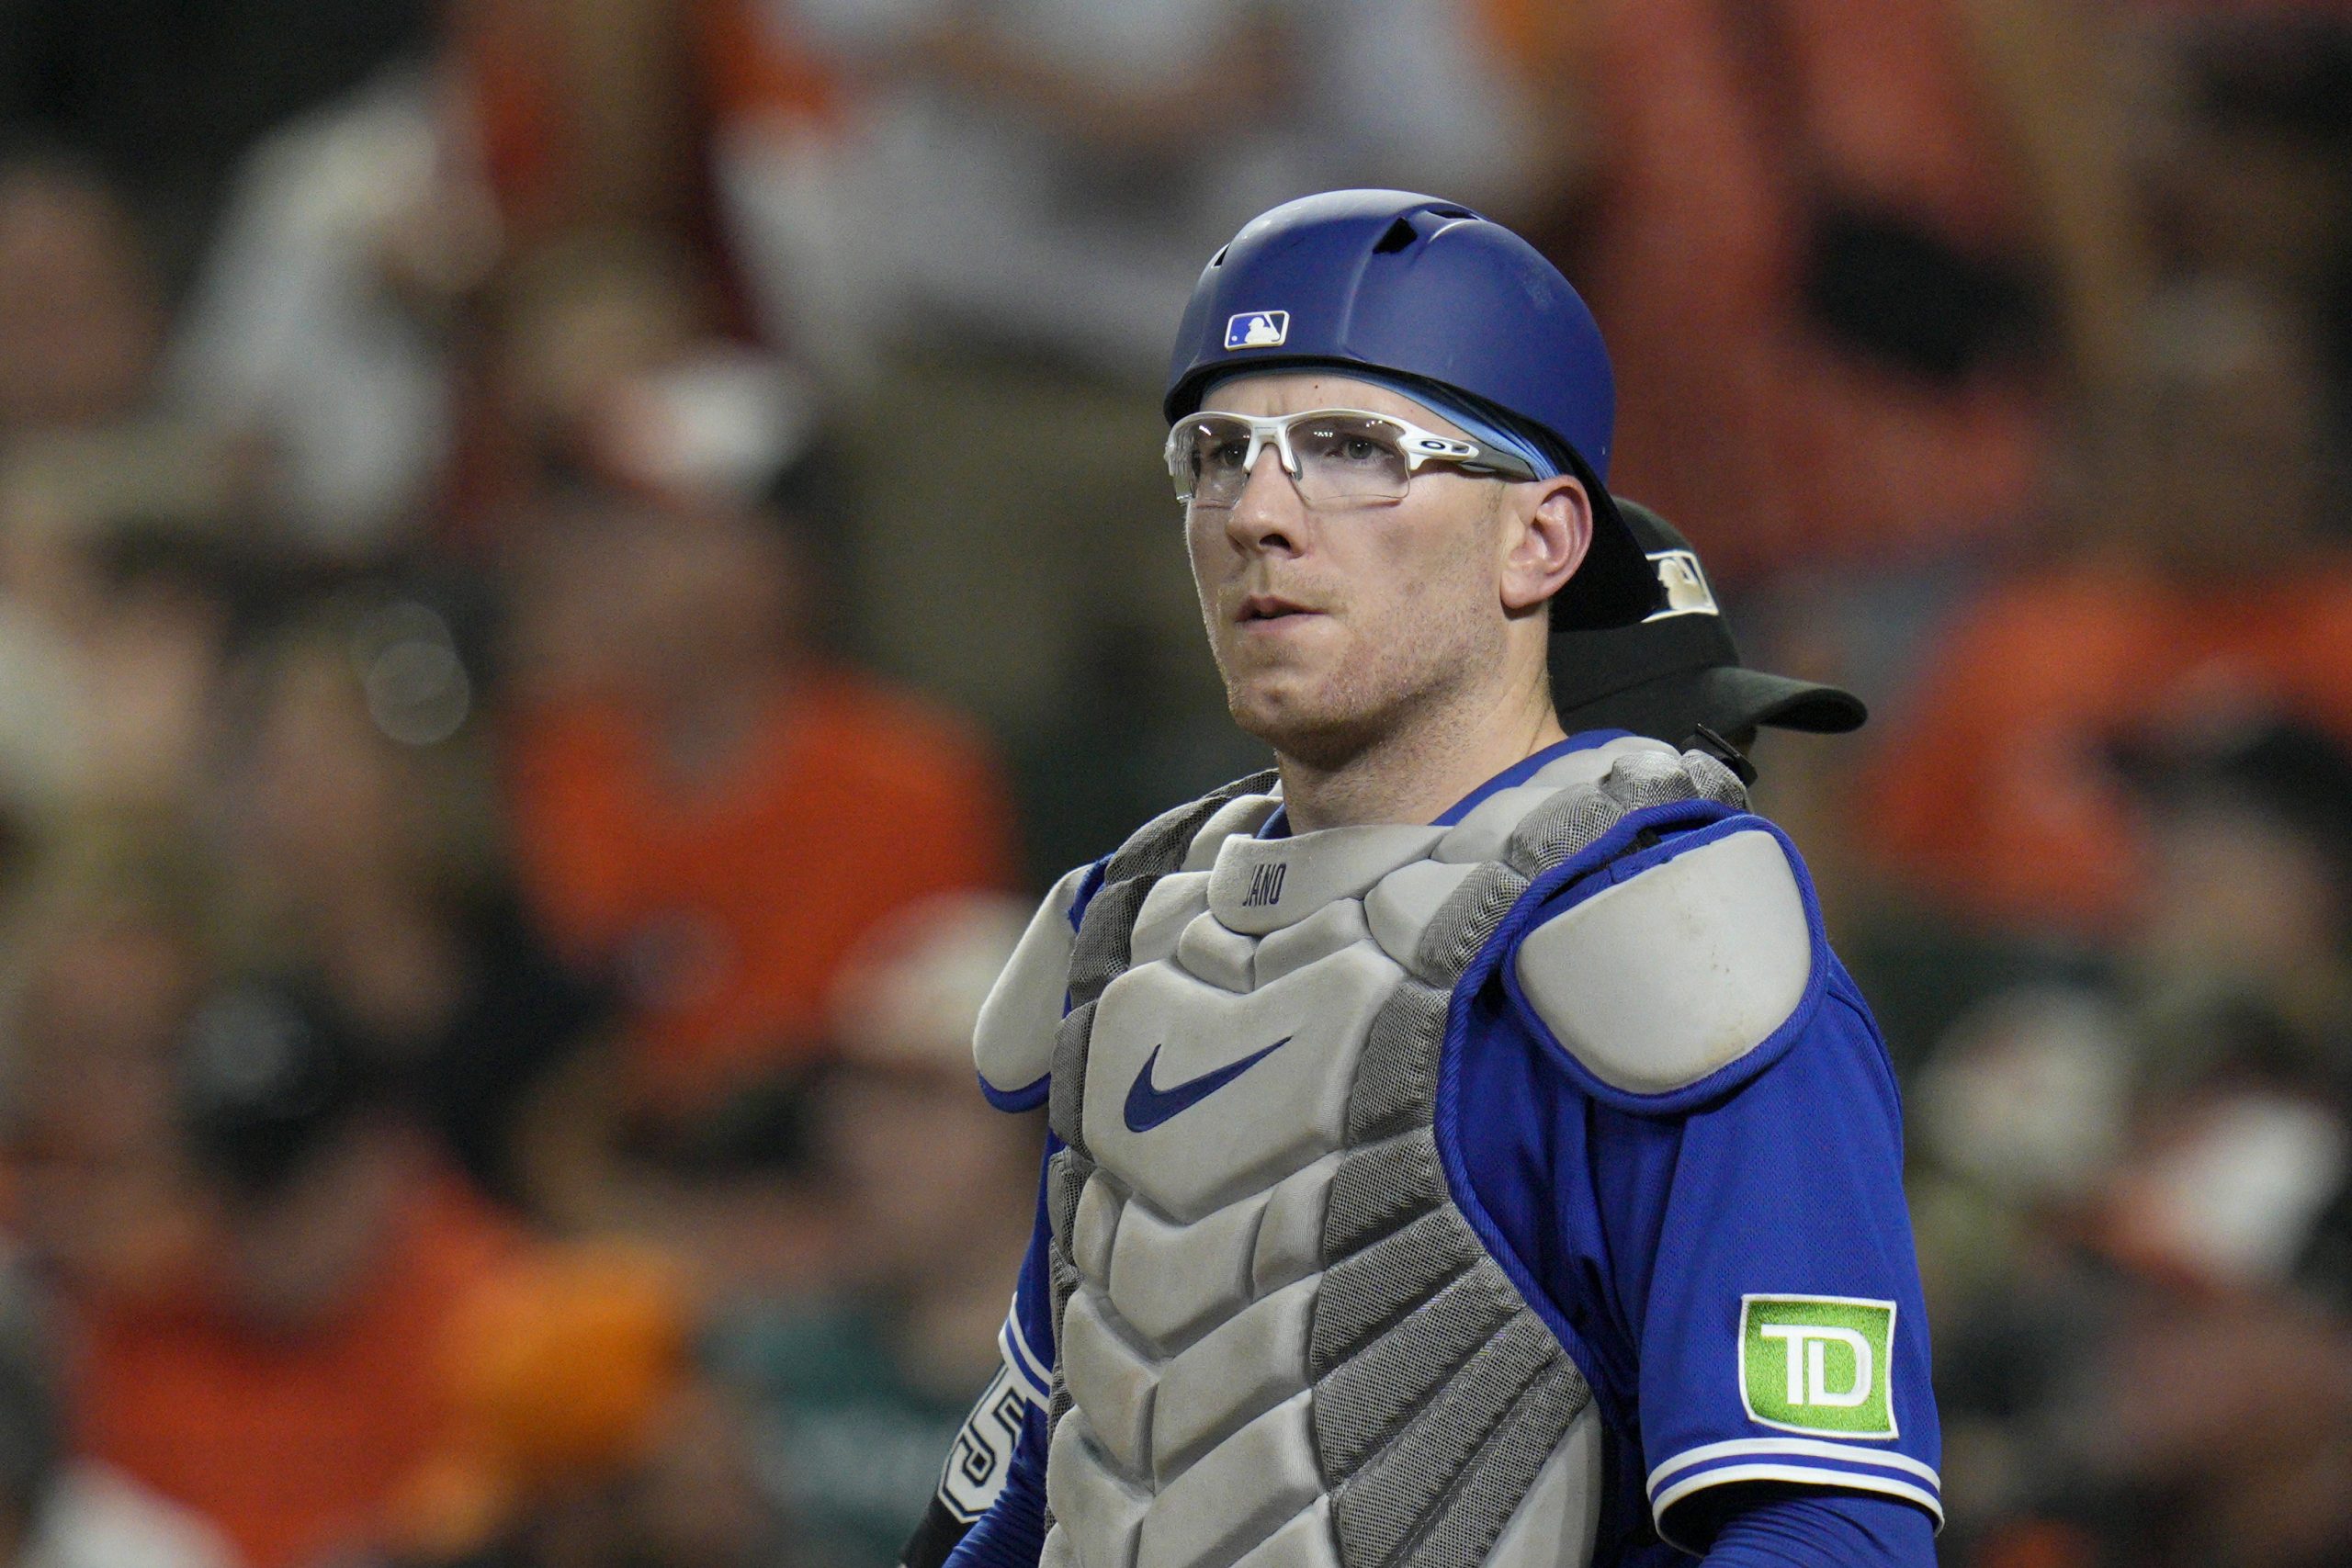 Catcher’s Return Timeline Unknown After Hit by Pitch [Video]